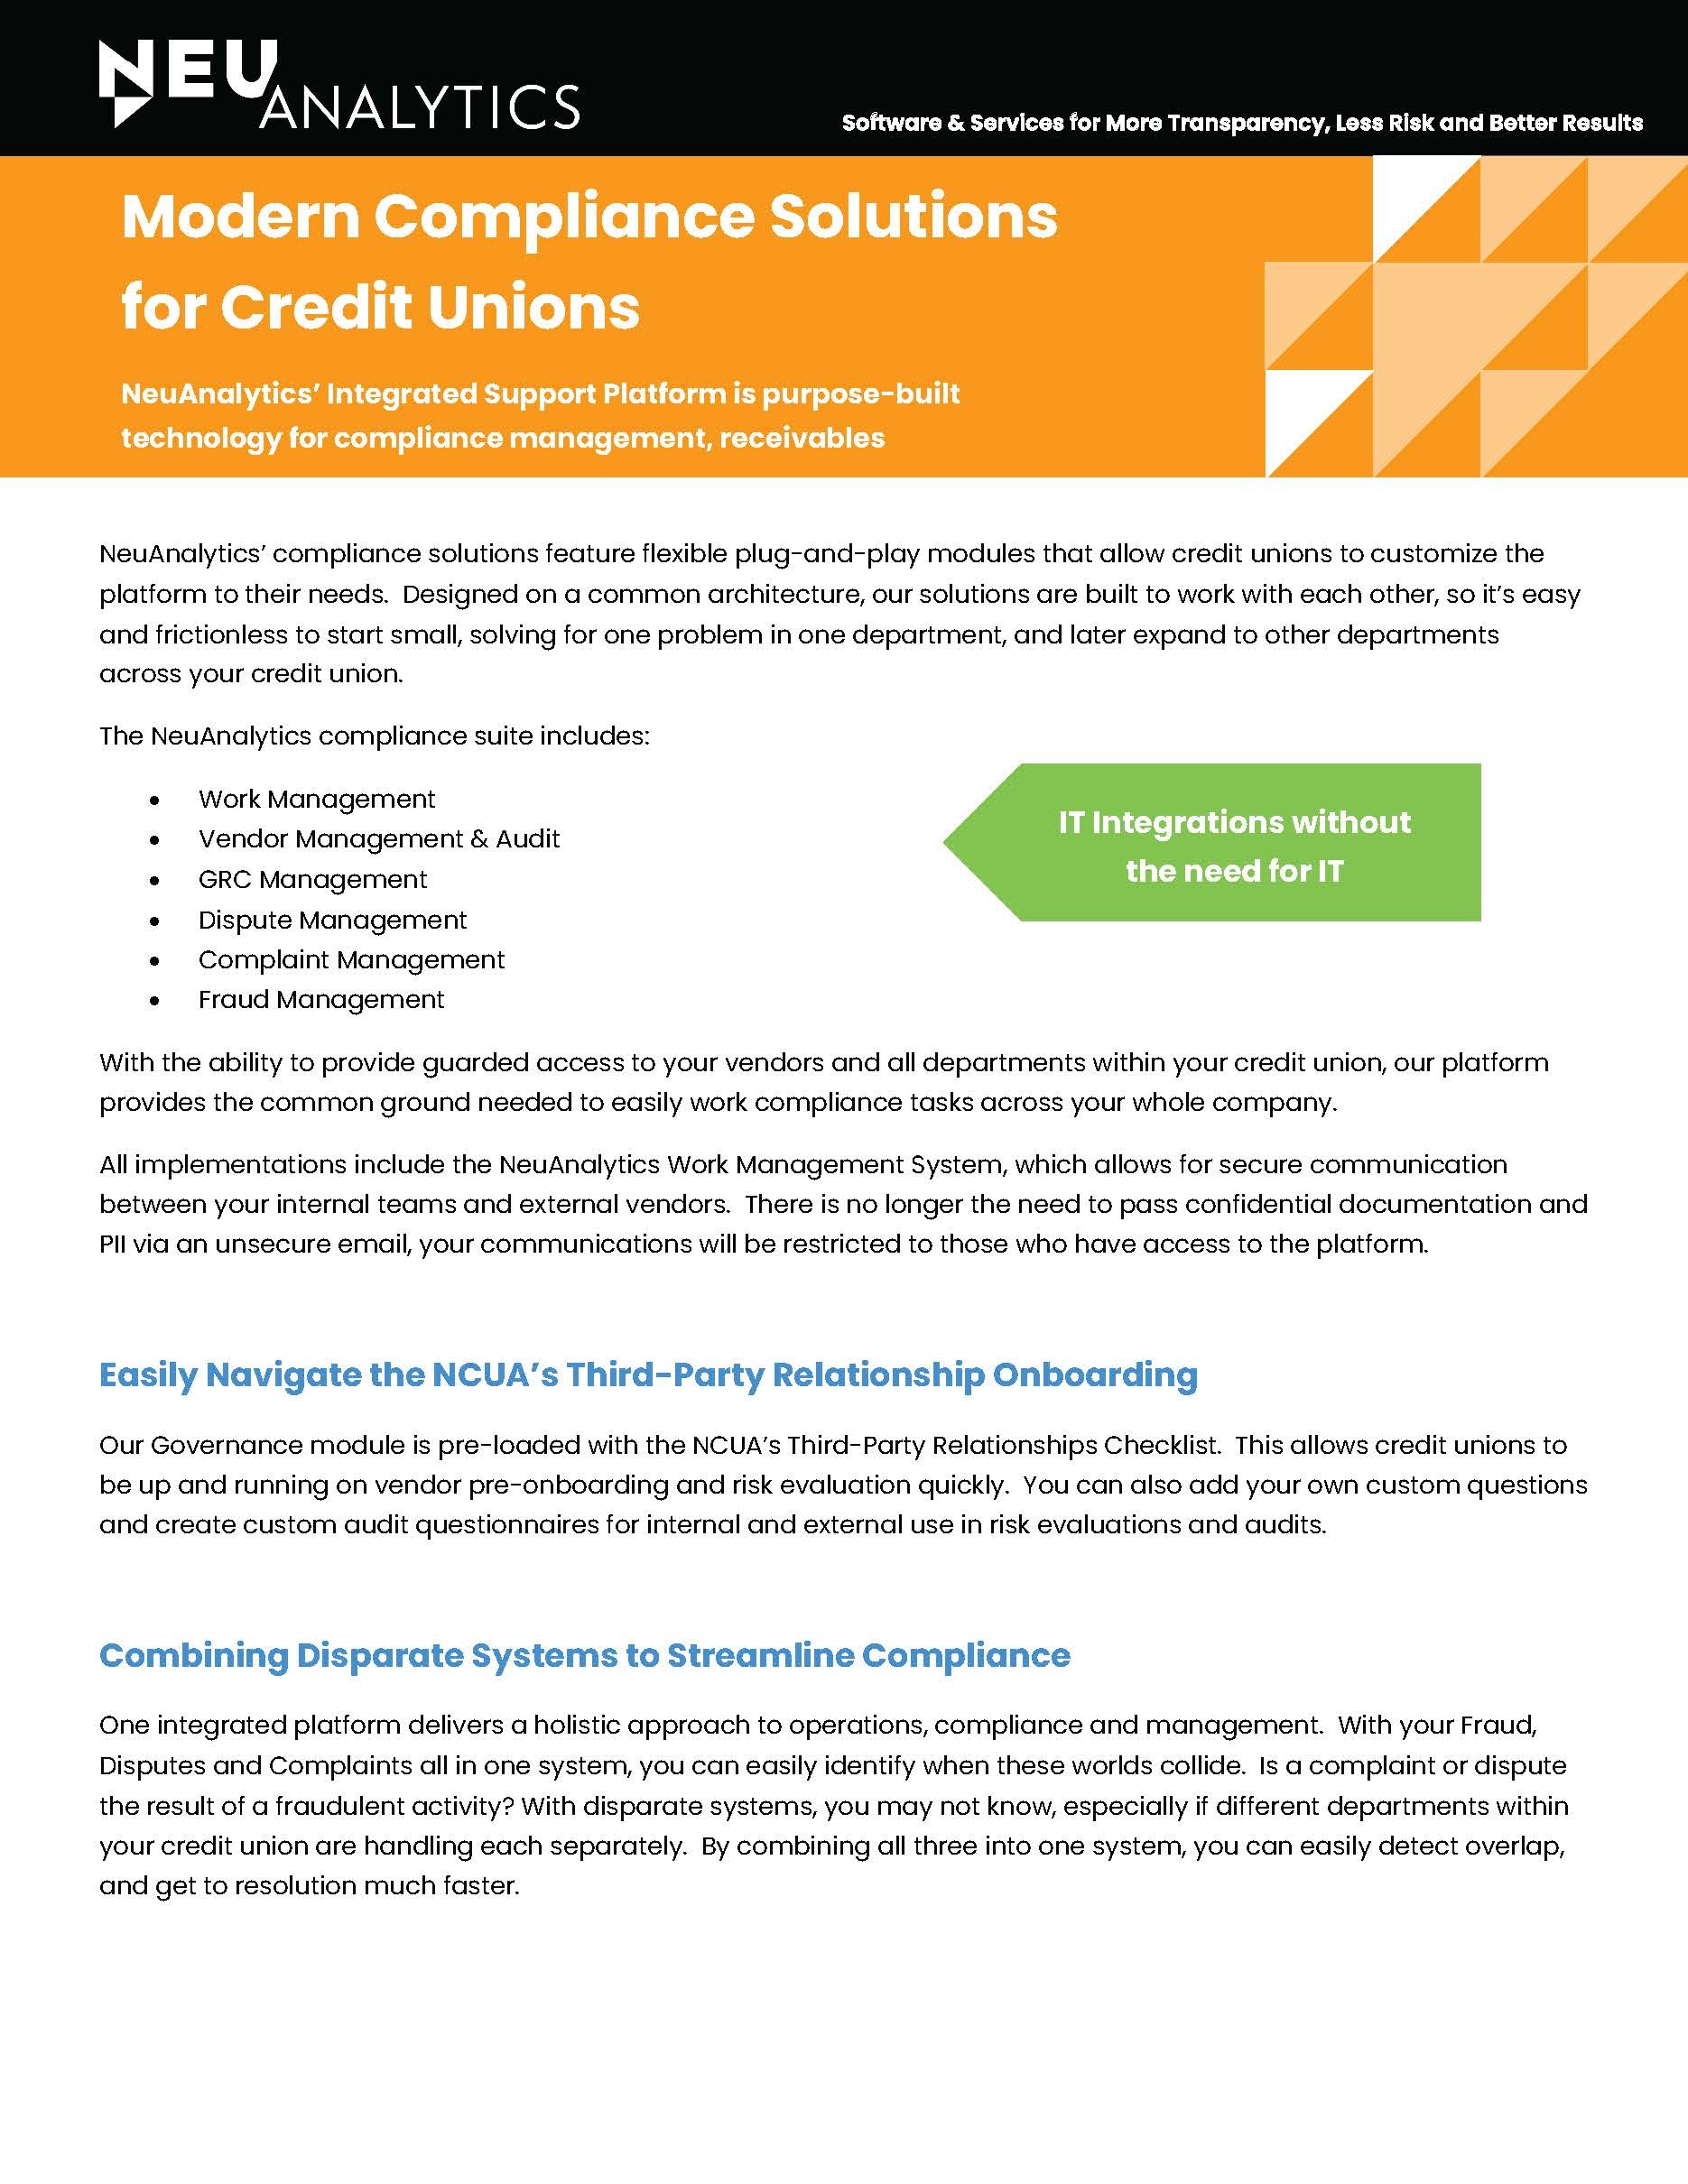 Modern Compliance Solutions for Credit Unions eBook Download